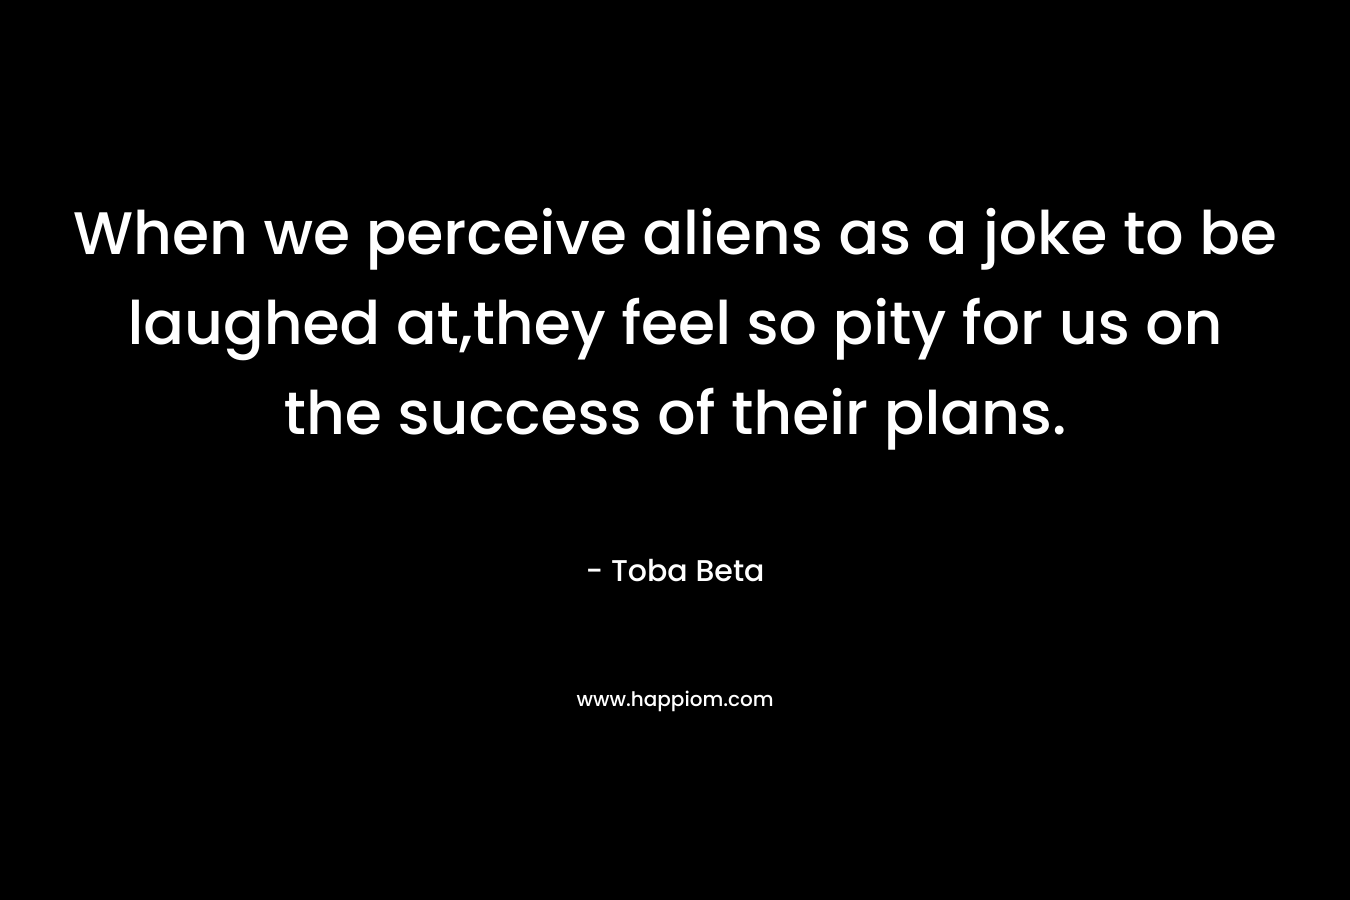 When we perceive aliens as a joke to be laughed at,they feel so pity for us on the success of their plans. – Toba Beta